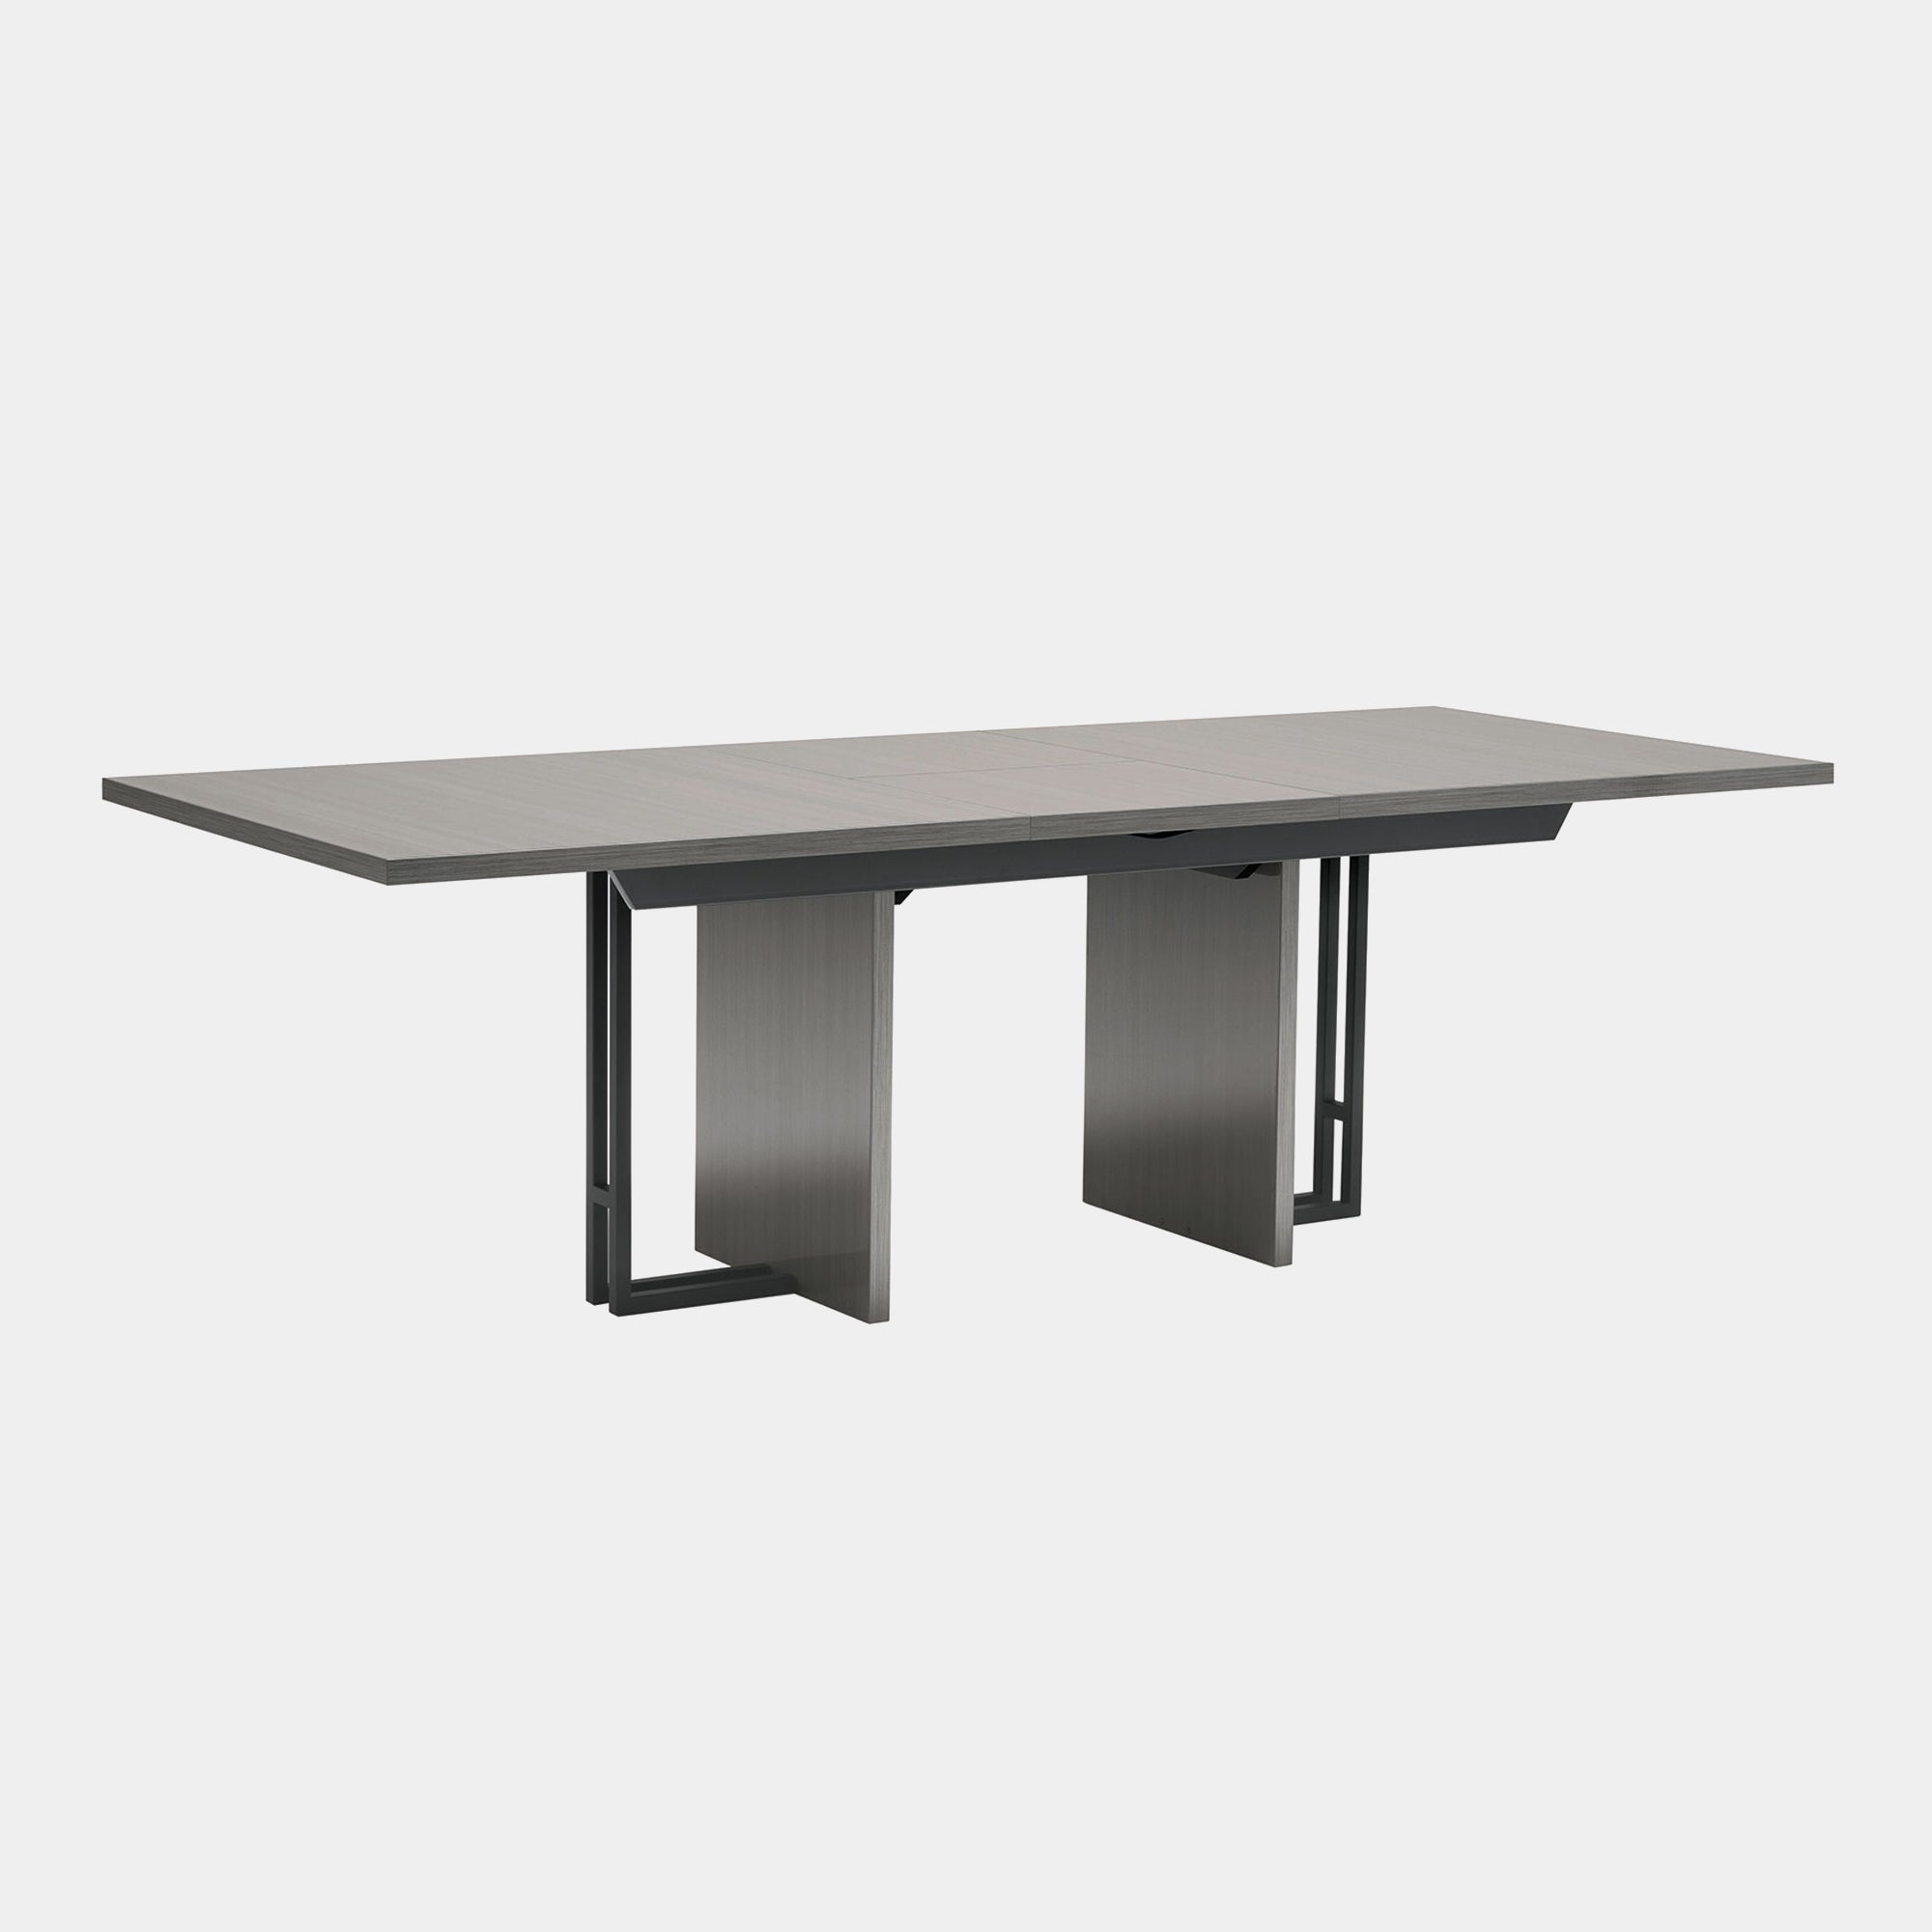 160cm Ext. Dining Table In Silver High Gloss Finish